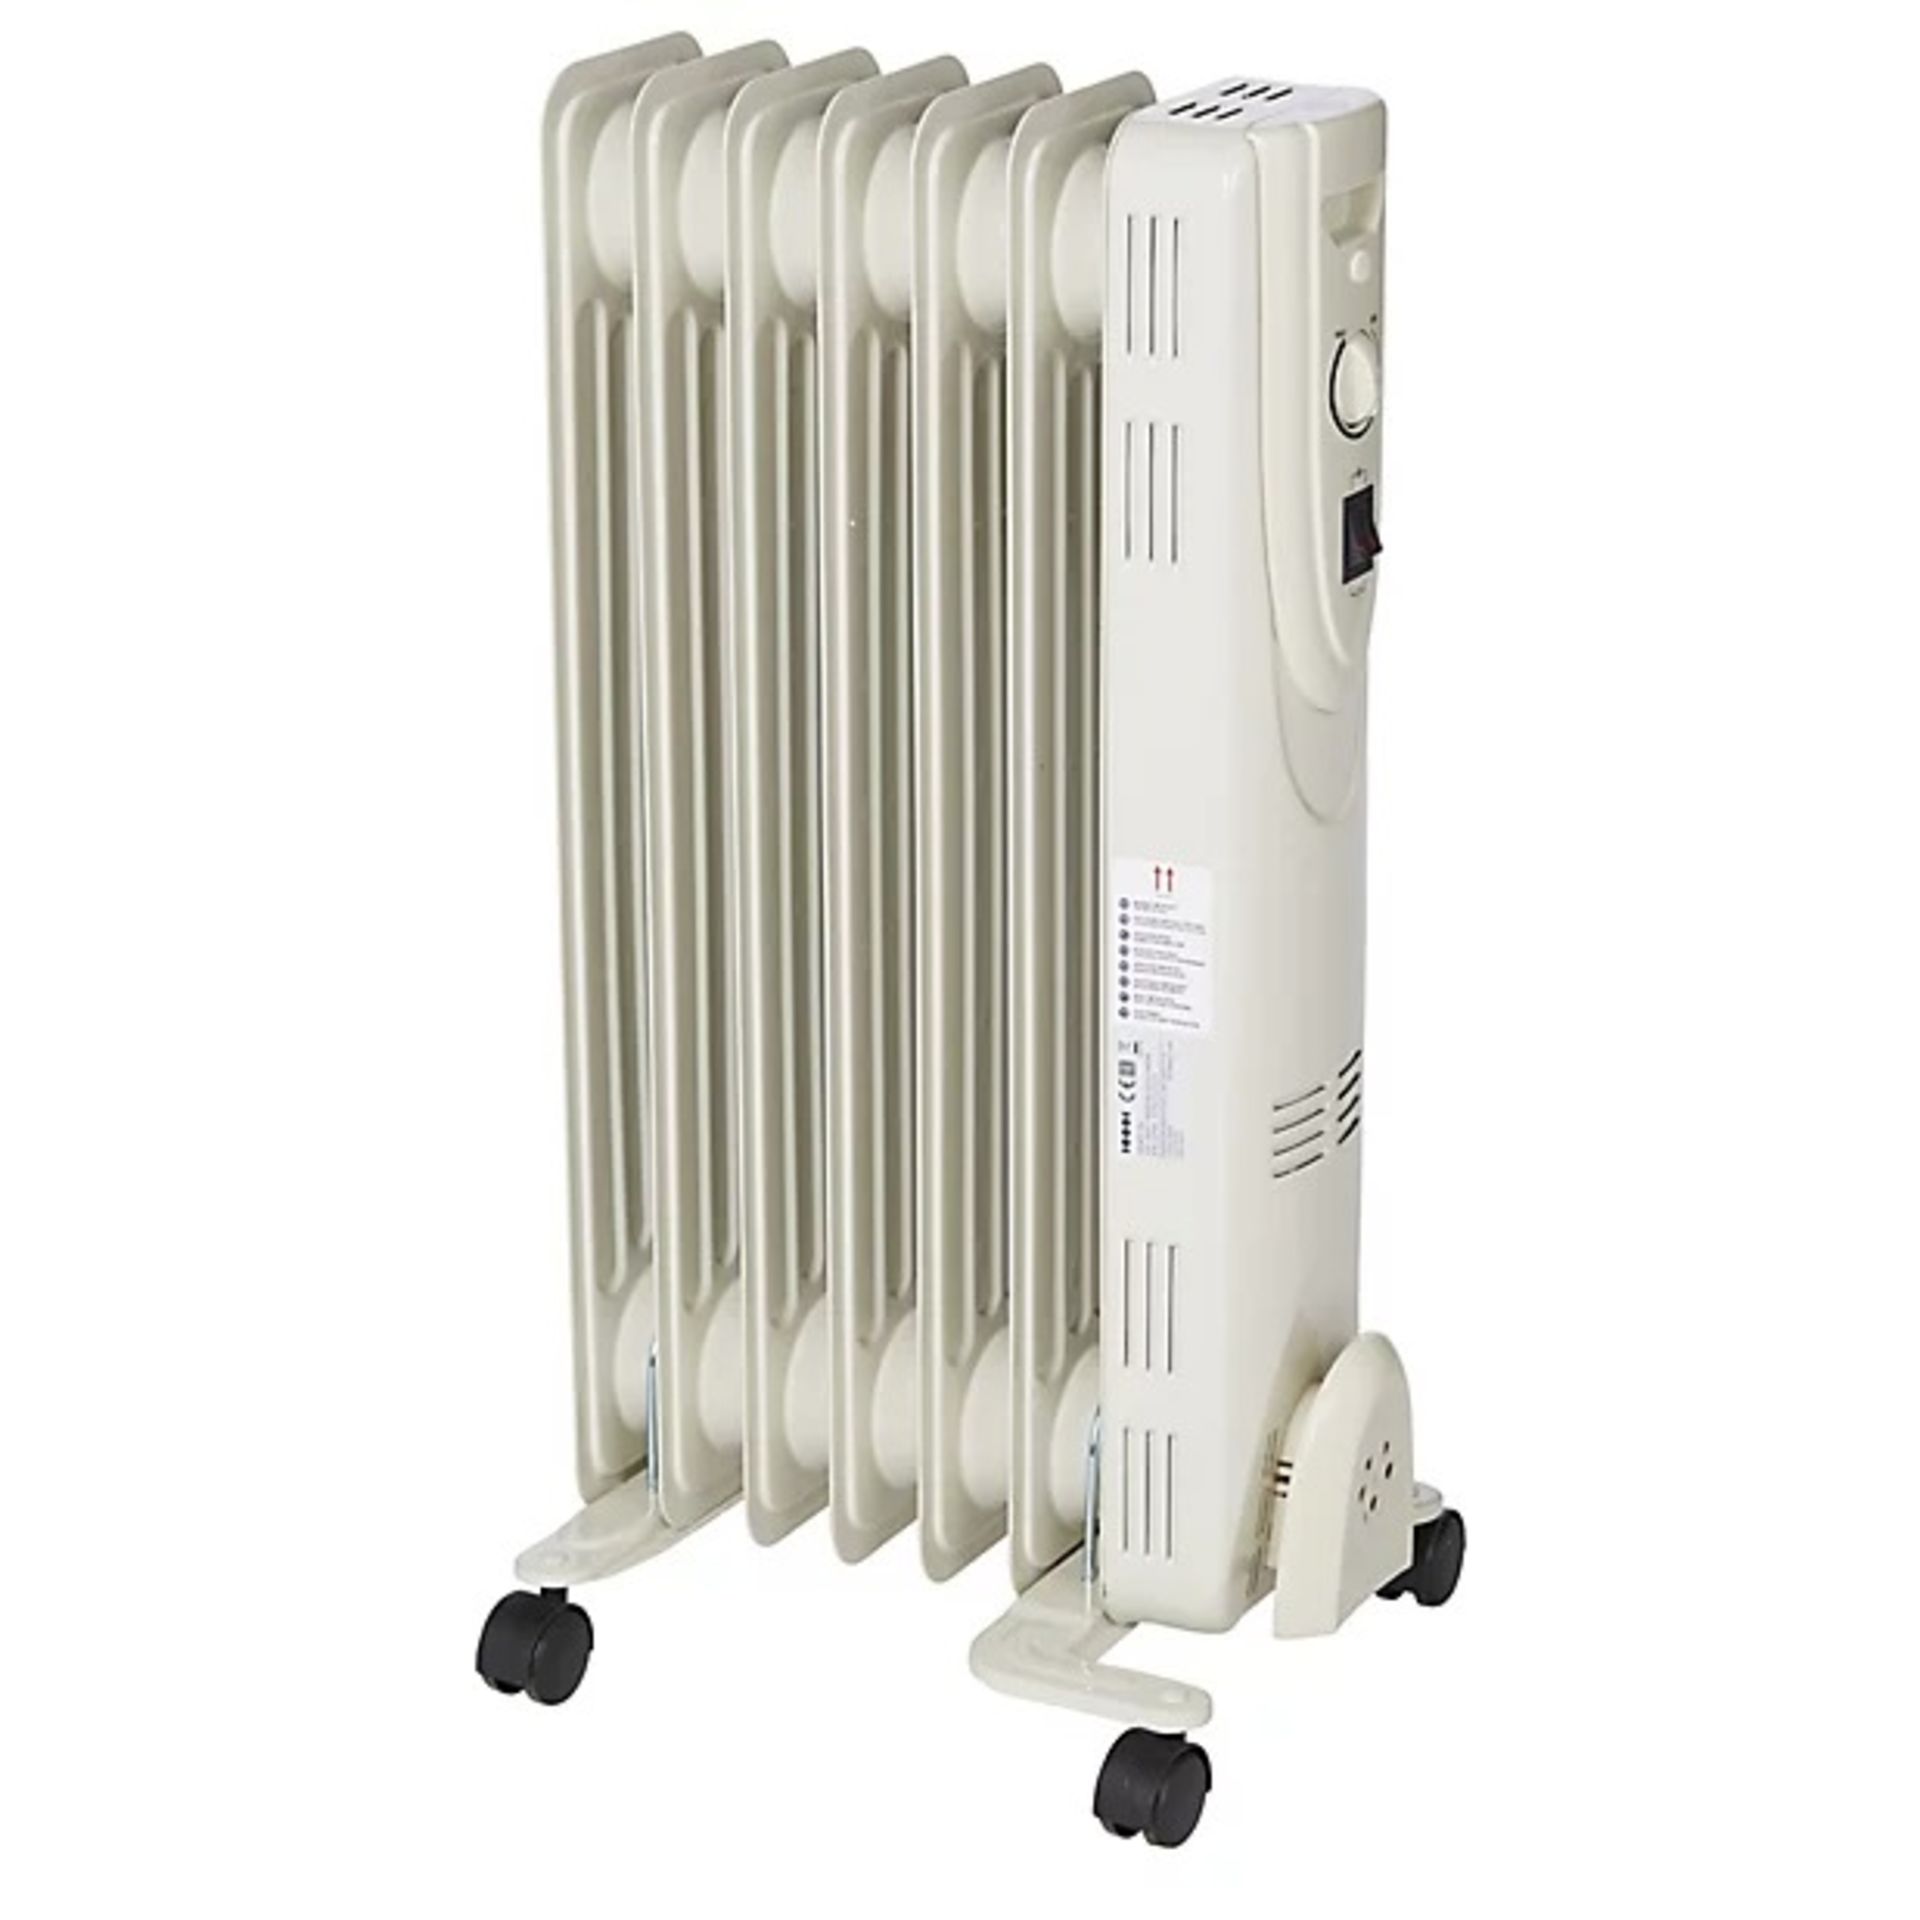 Essentials 1500W Oil-Filled Radiator White Space Heaters - ER40.2